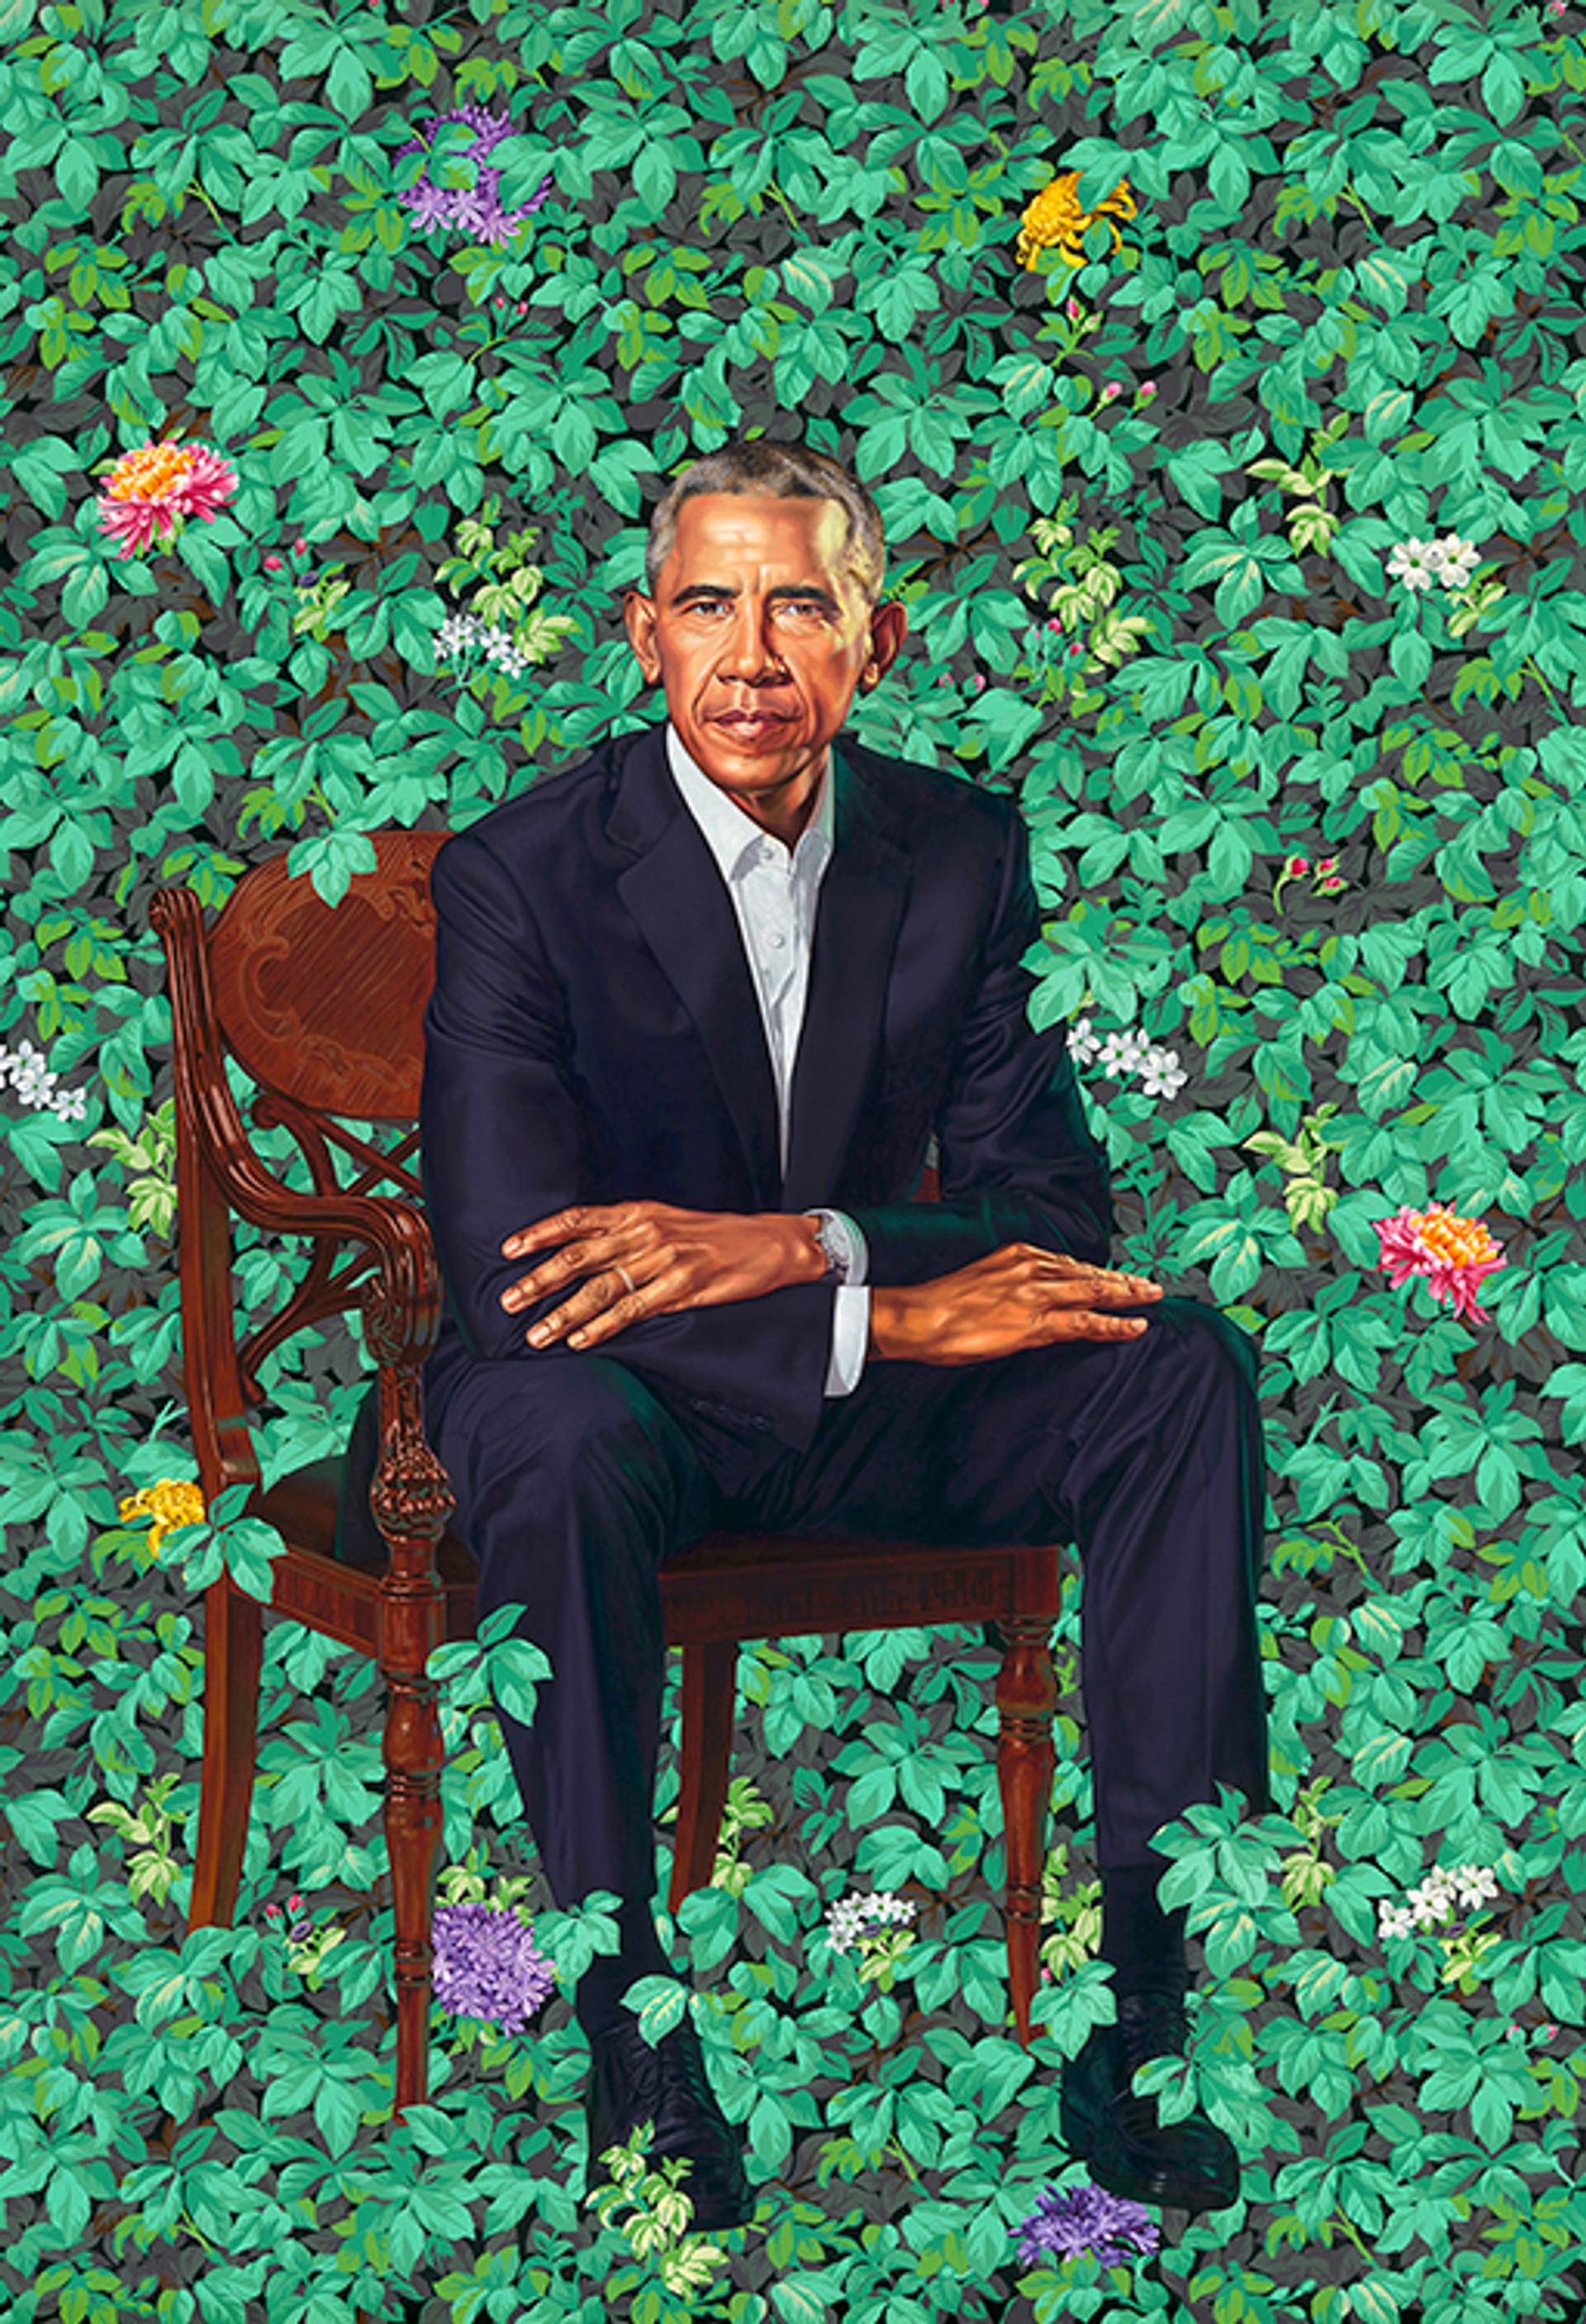 Kehinde Wiley’s Barack Hussein Obama. A presidential portrait of Barack Obama set against a bright green background of foliage.